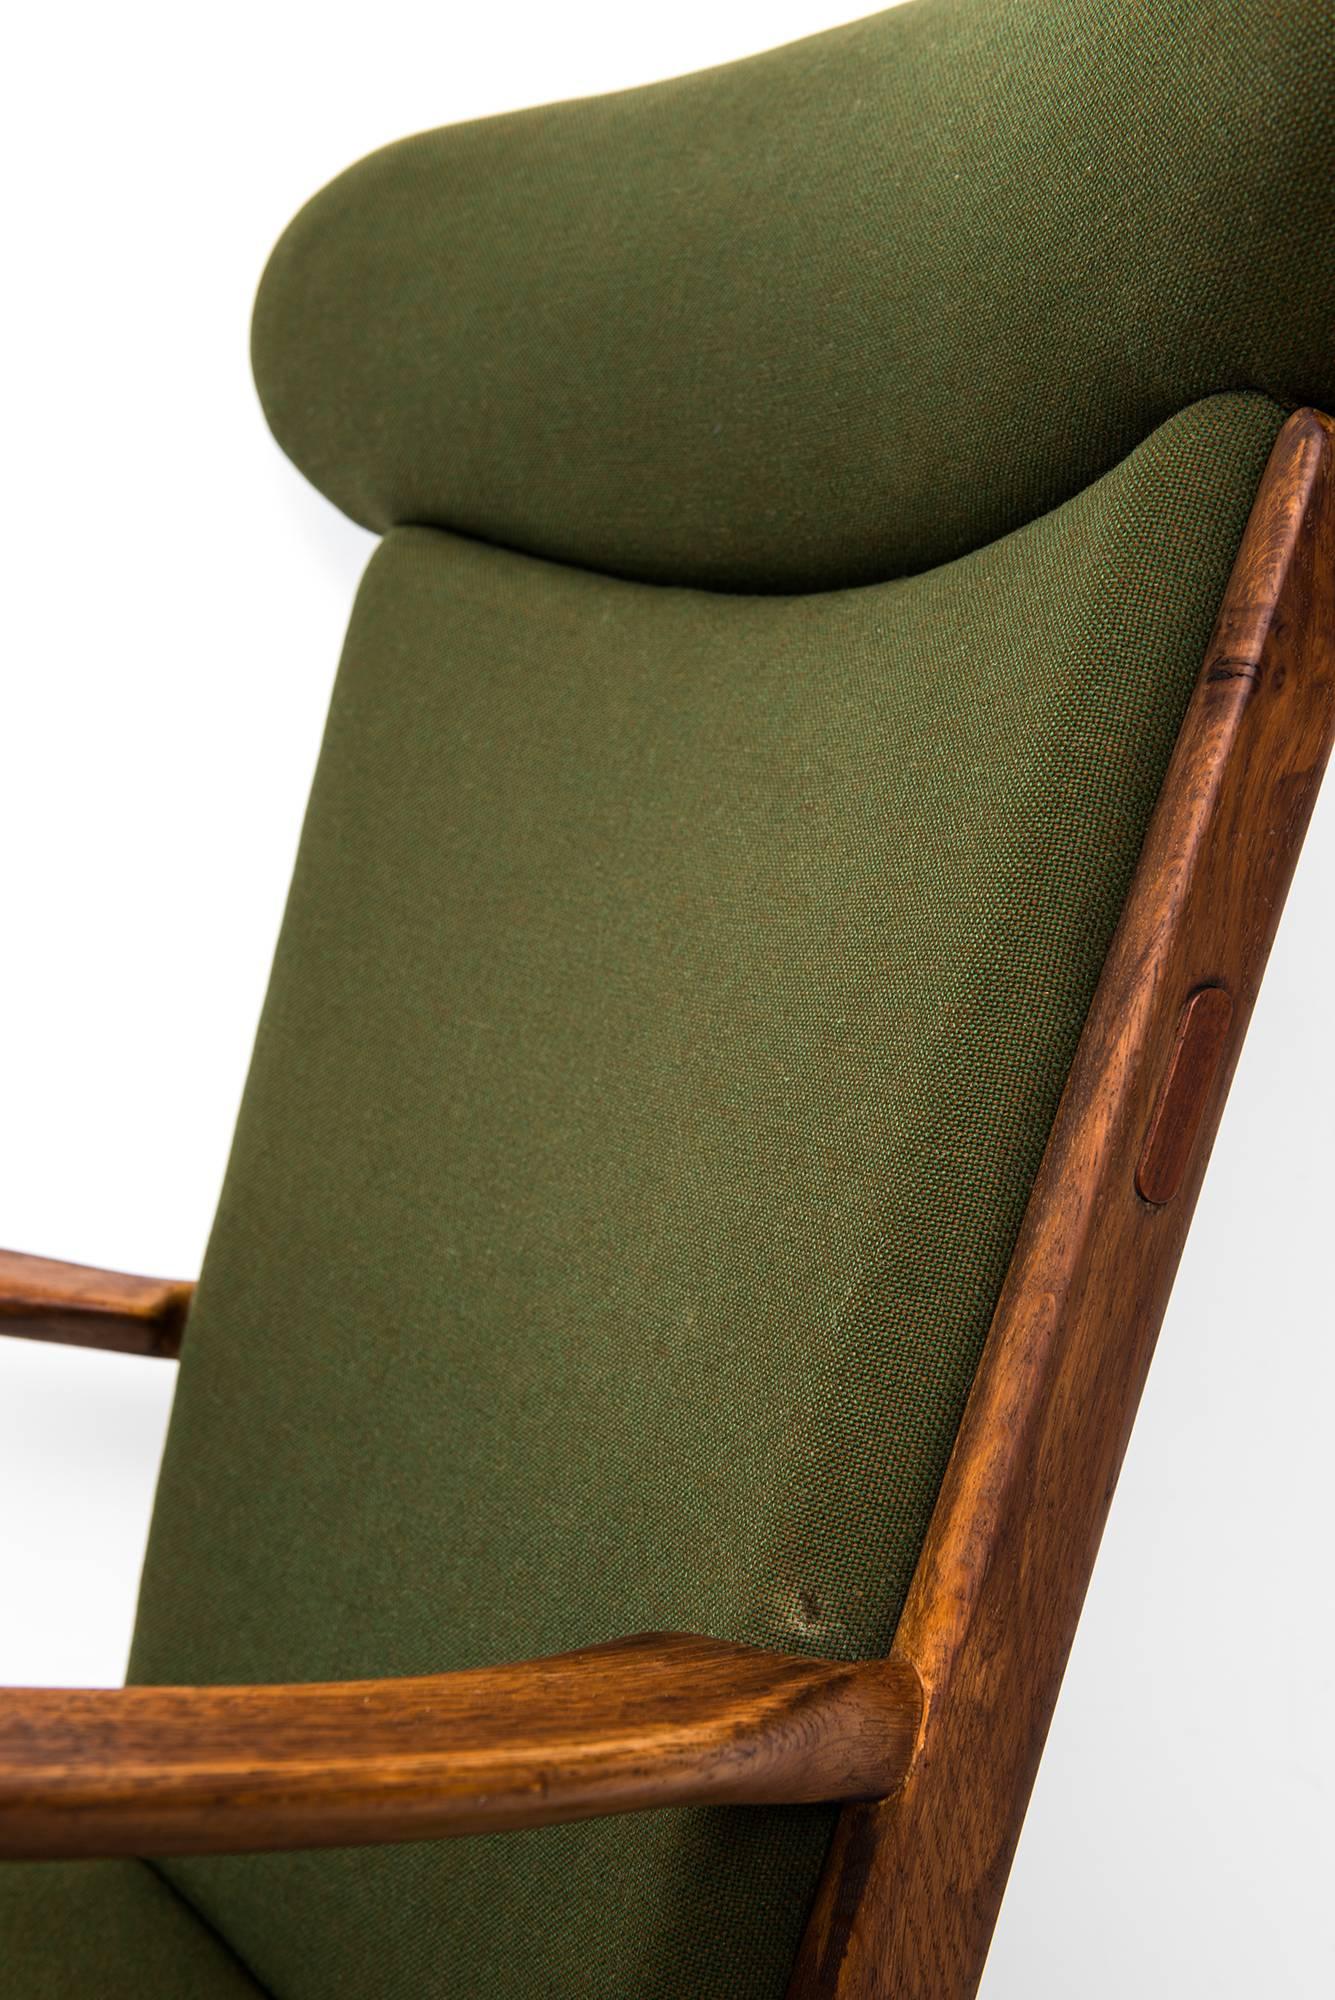 Mid-20th Century Easy Chair Model AP-15 Designed by Hans Wegner Produced by AP-Stolen in Denmark For Sale